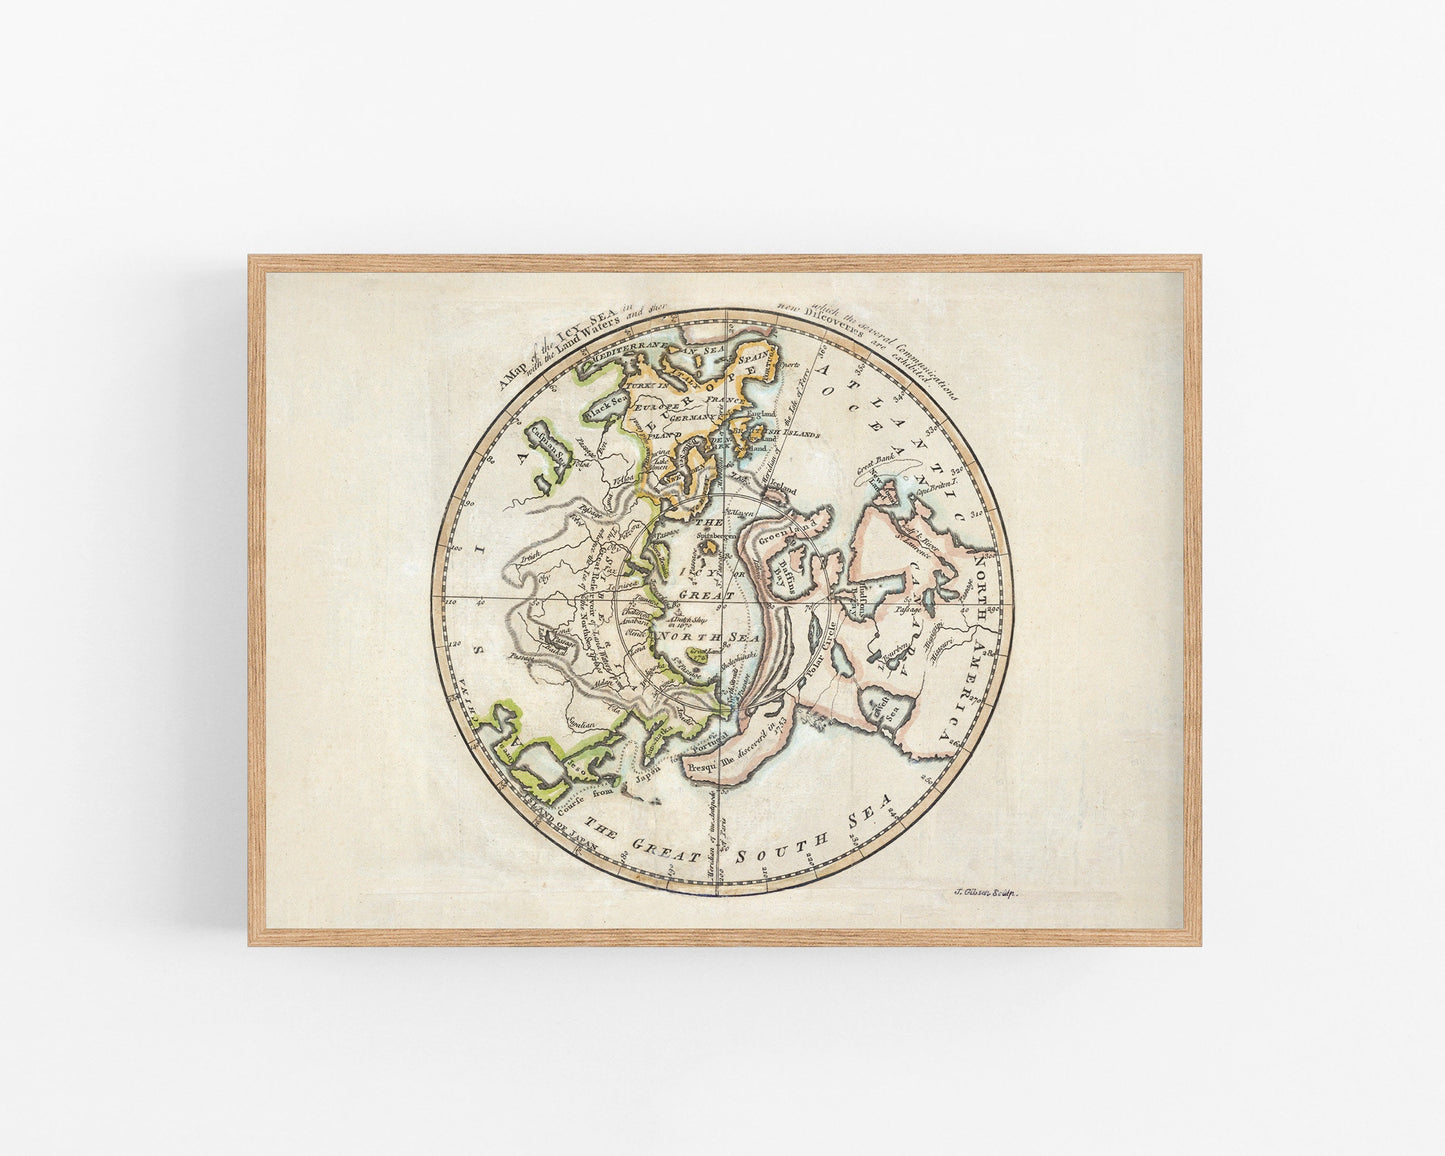 Antique world map | Arctic regions art print | Vintage cartography | Travelers wall art | Map of the icy sea | Modern vintage Decor